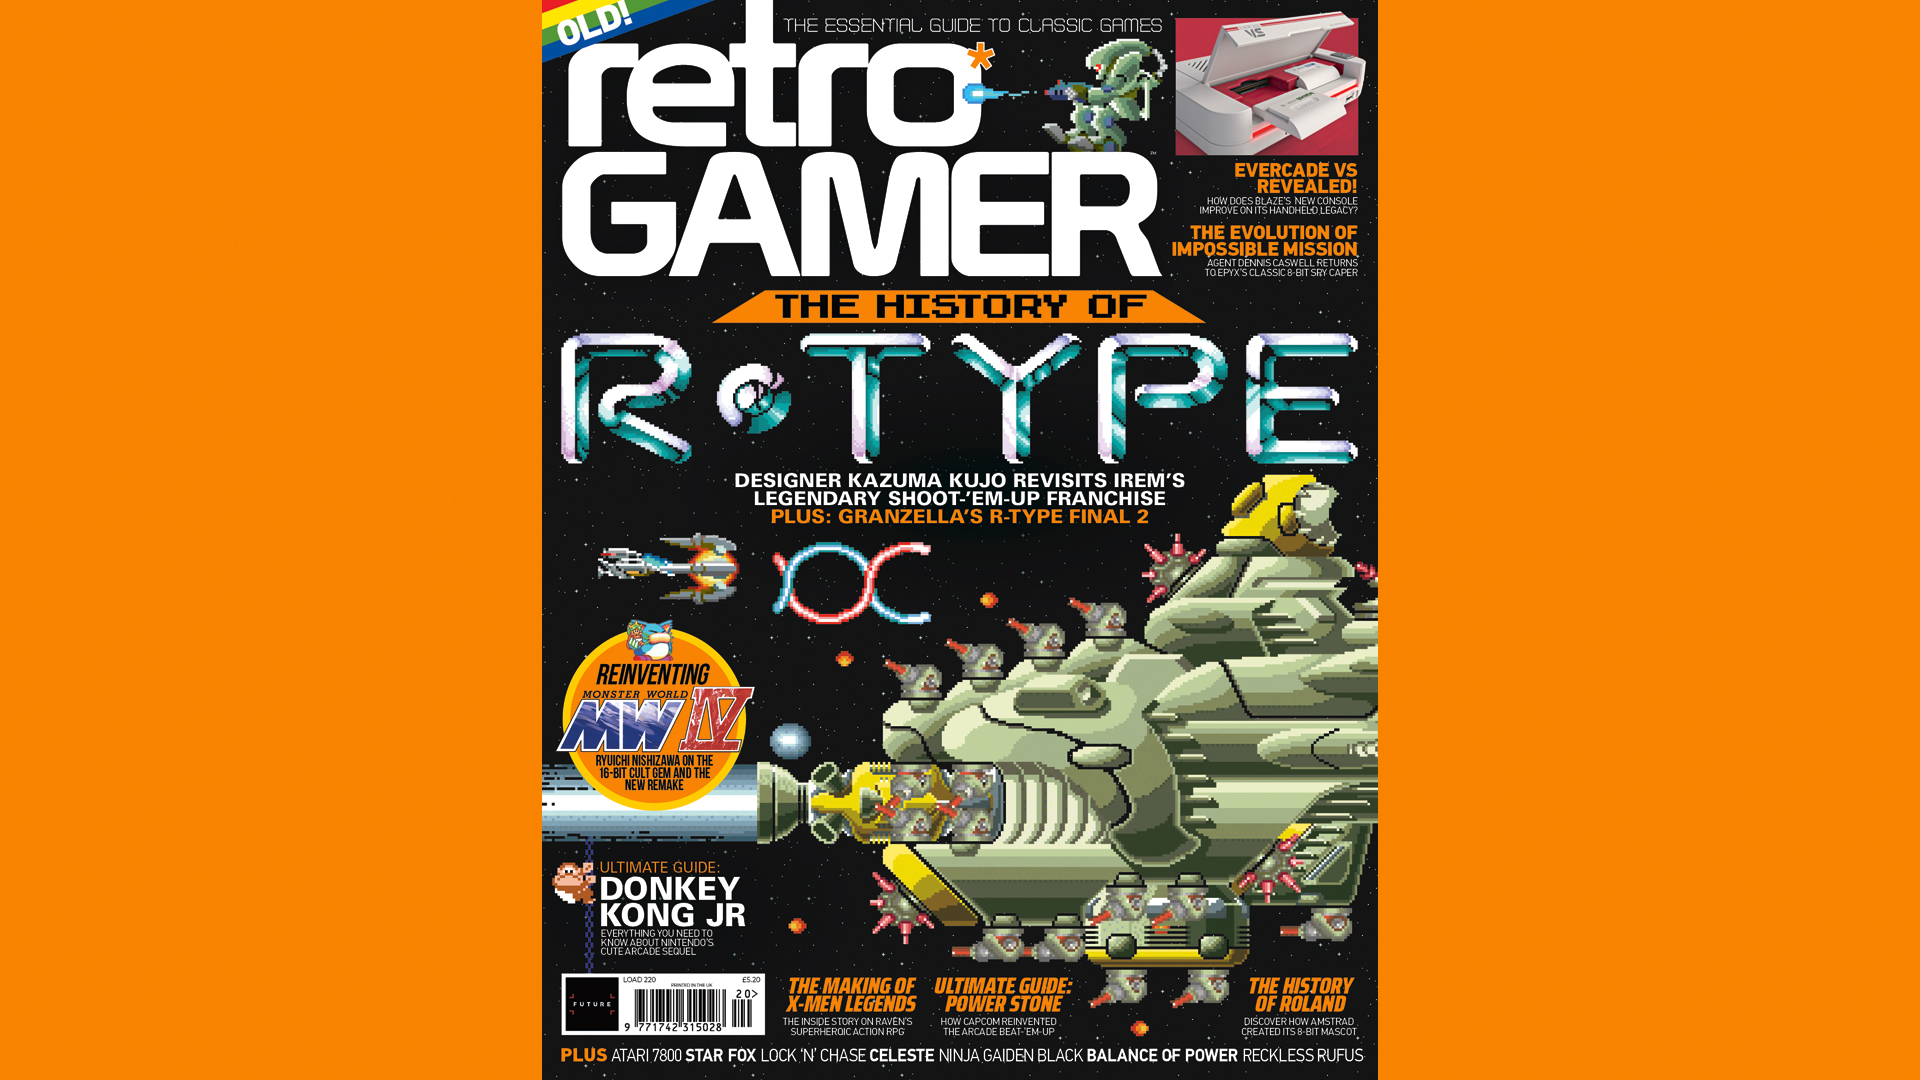 R-Type Final 2 is the star of this month’s Retro Gamer